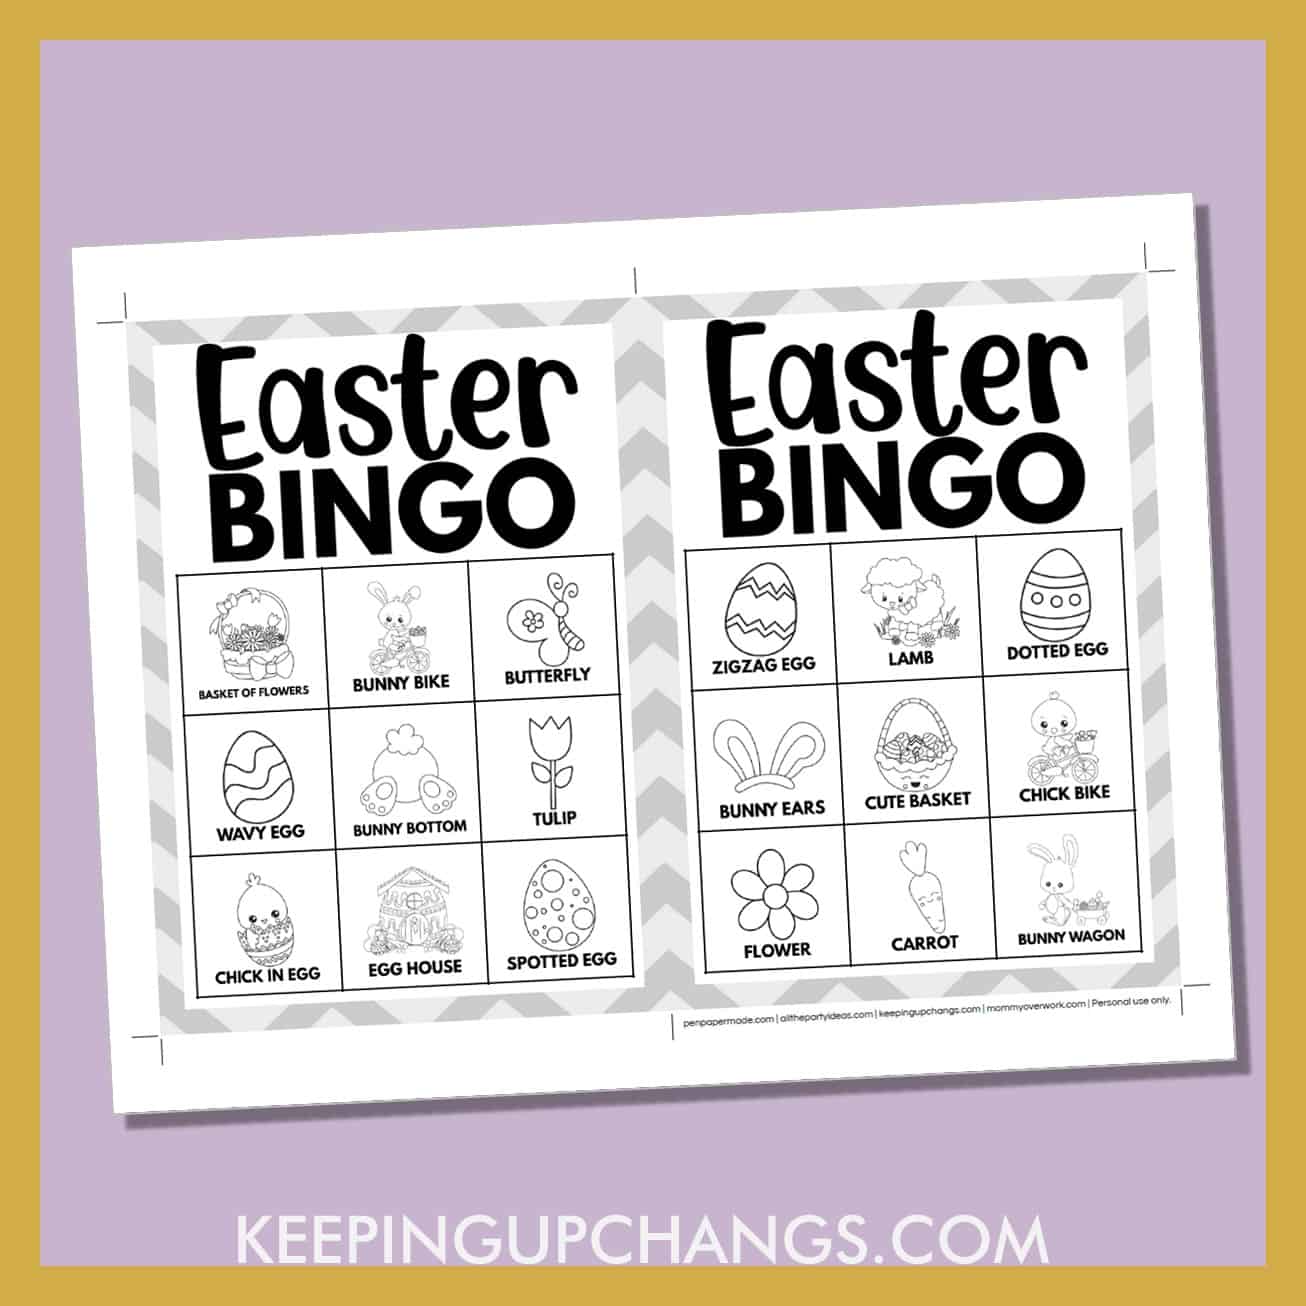 free easter bingo card 3x3 5x7 black white coloring game boards with images and text words.